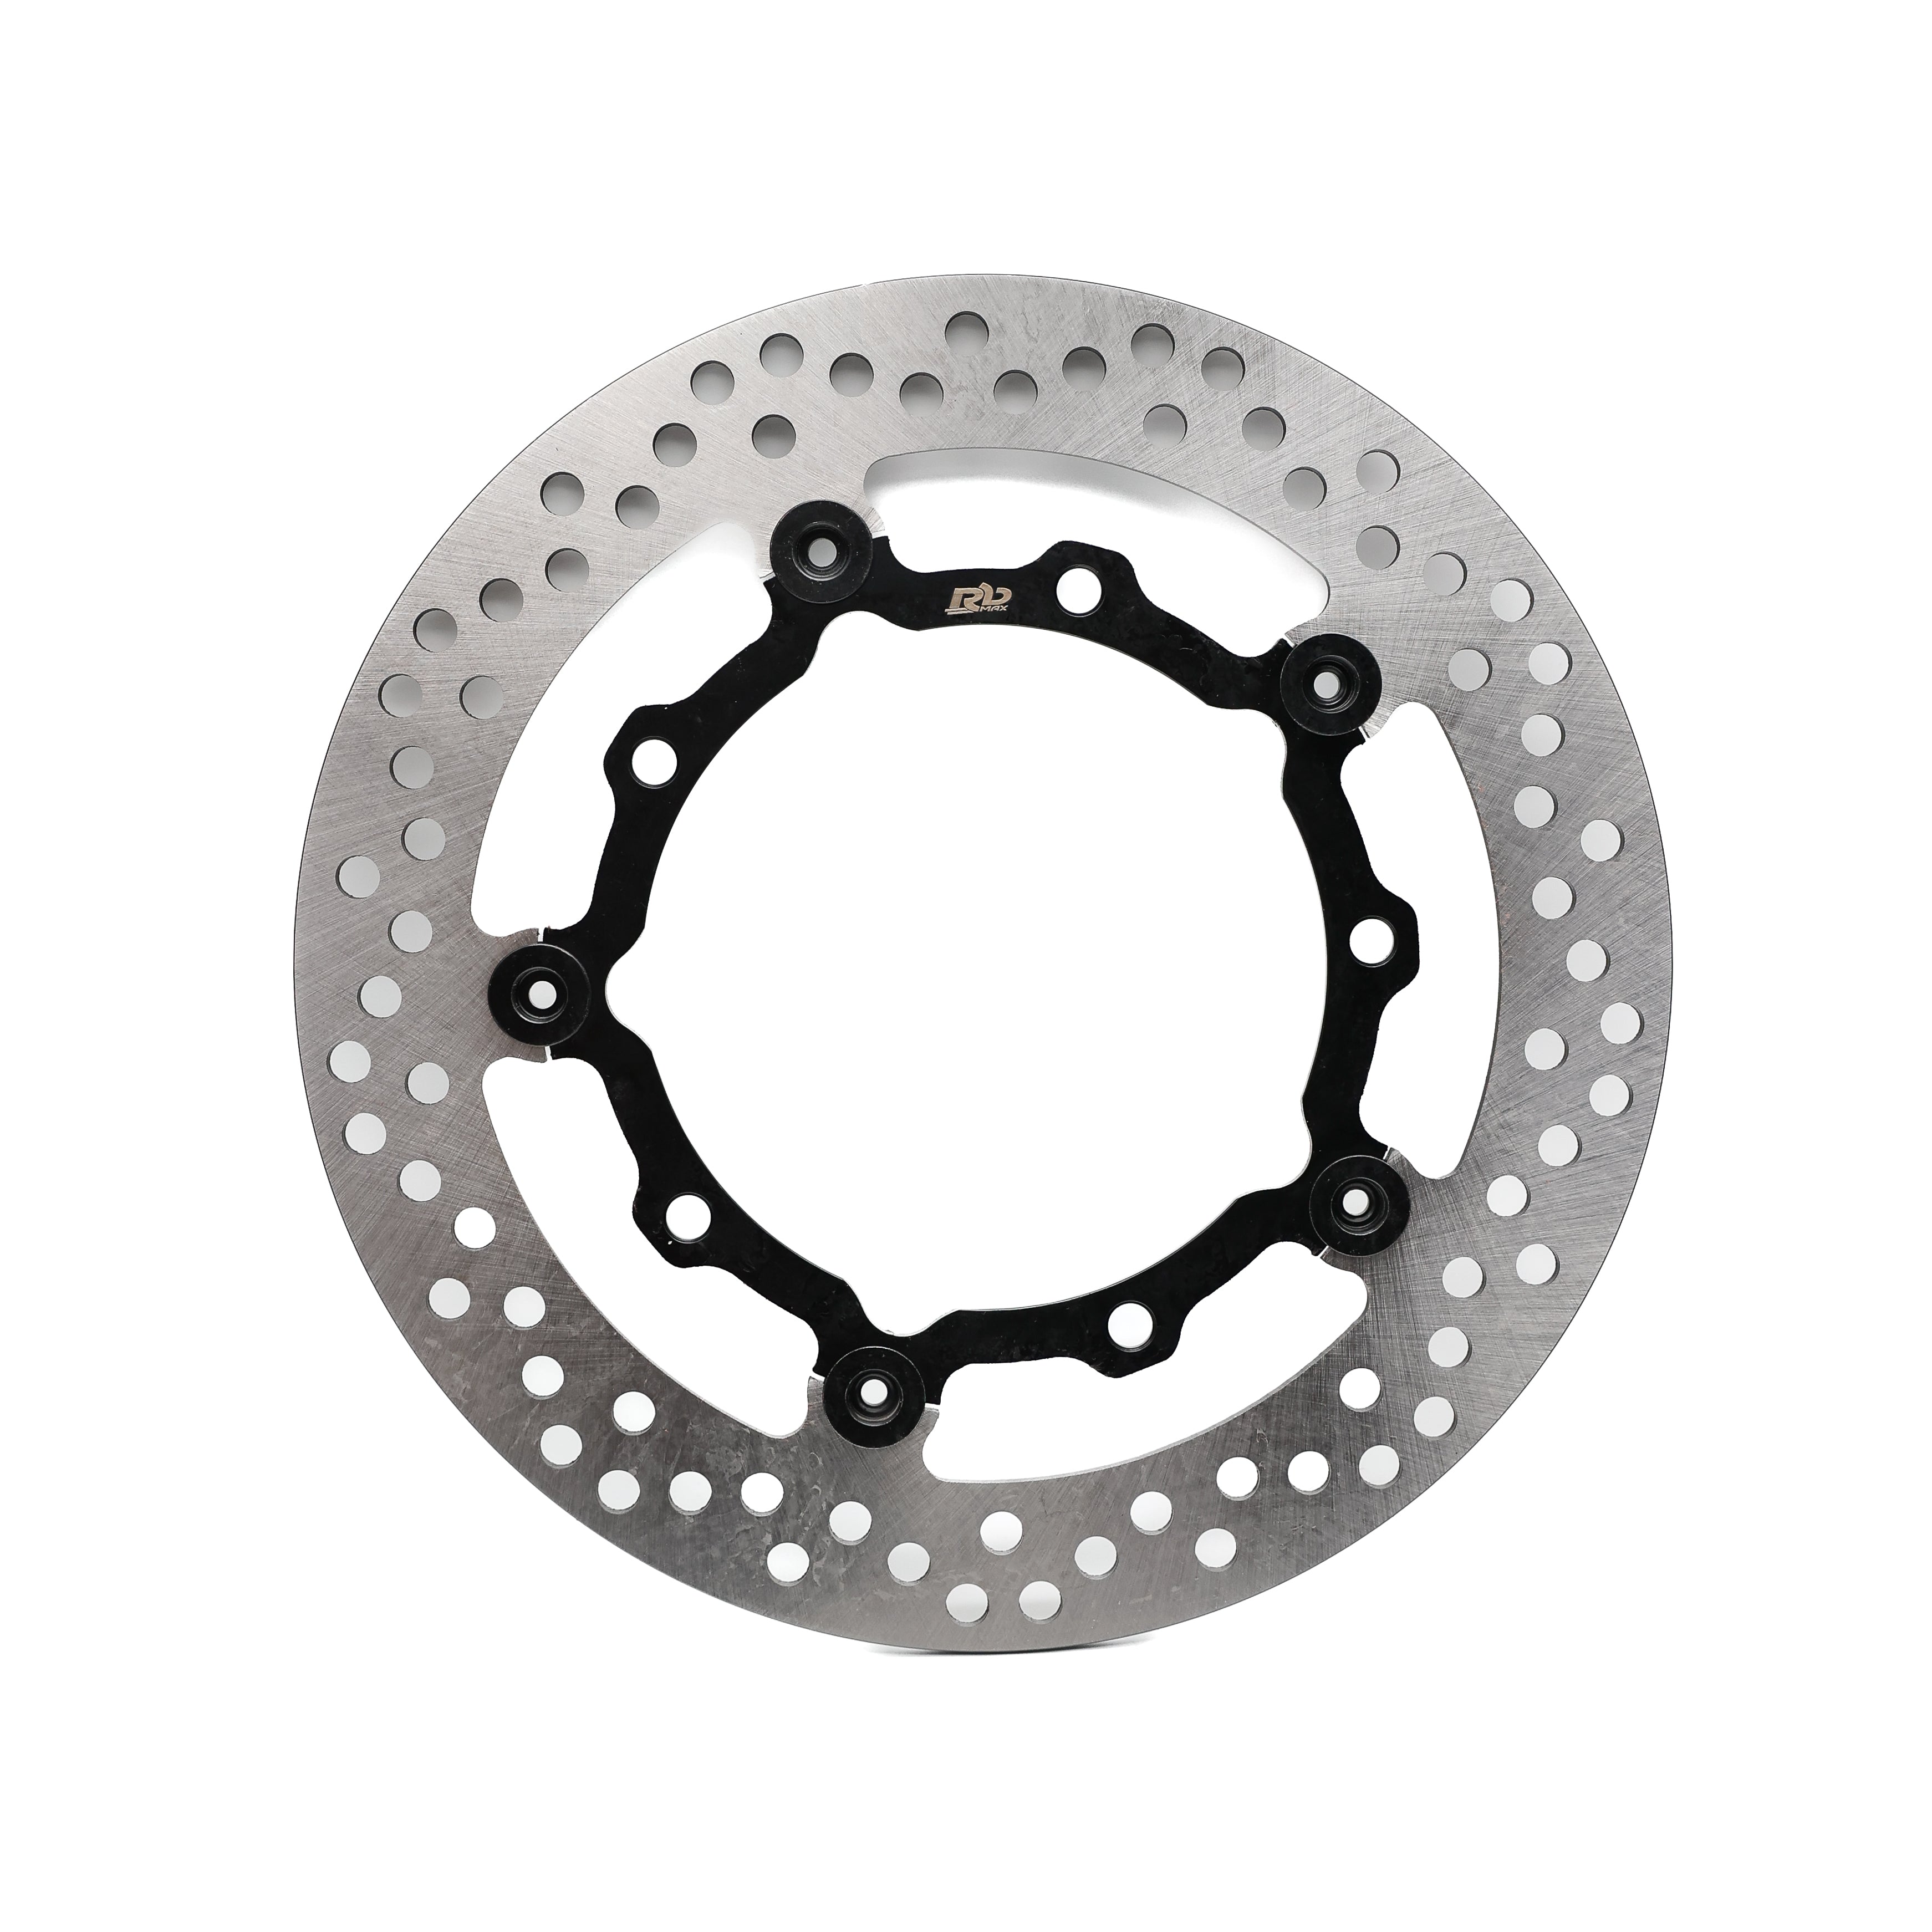 TMAX adaptable front brake disc